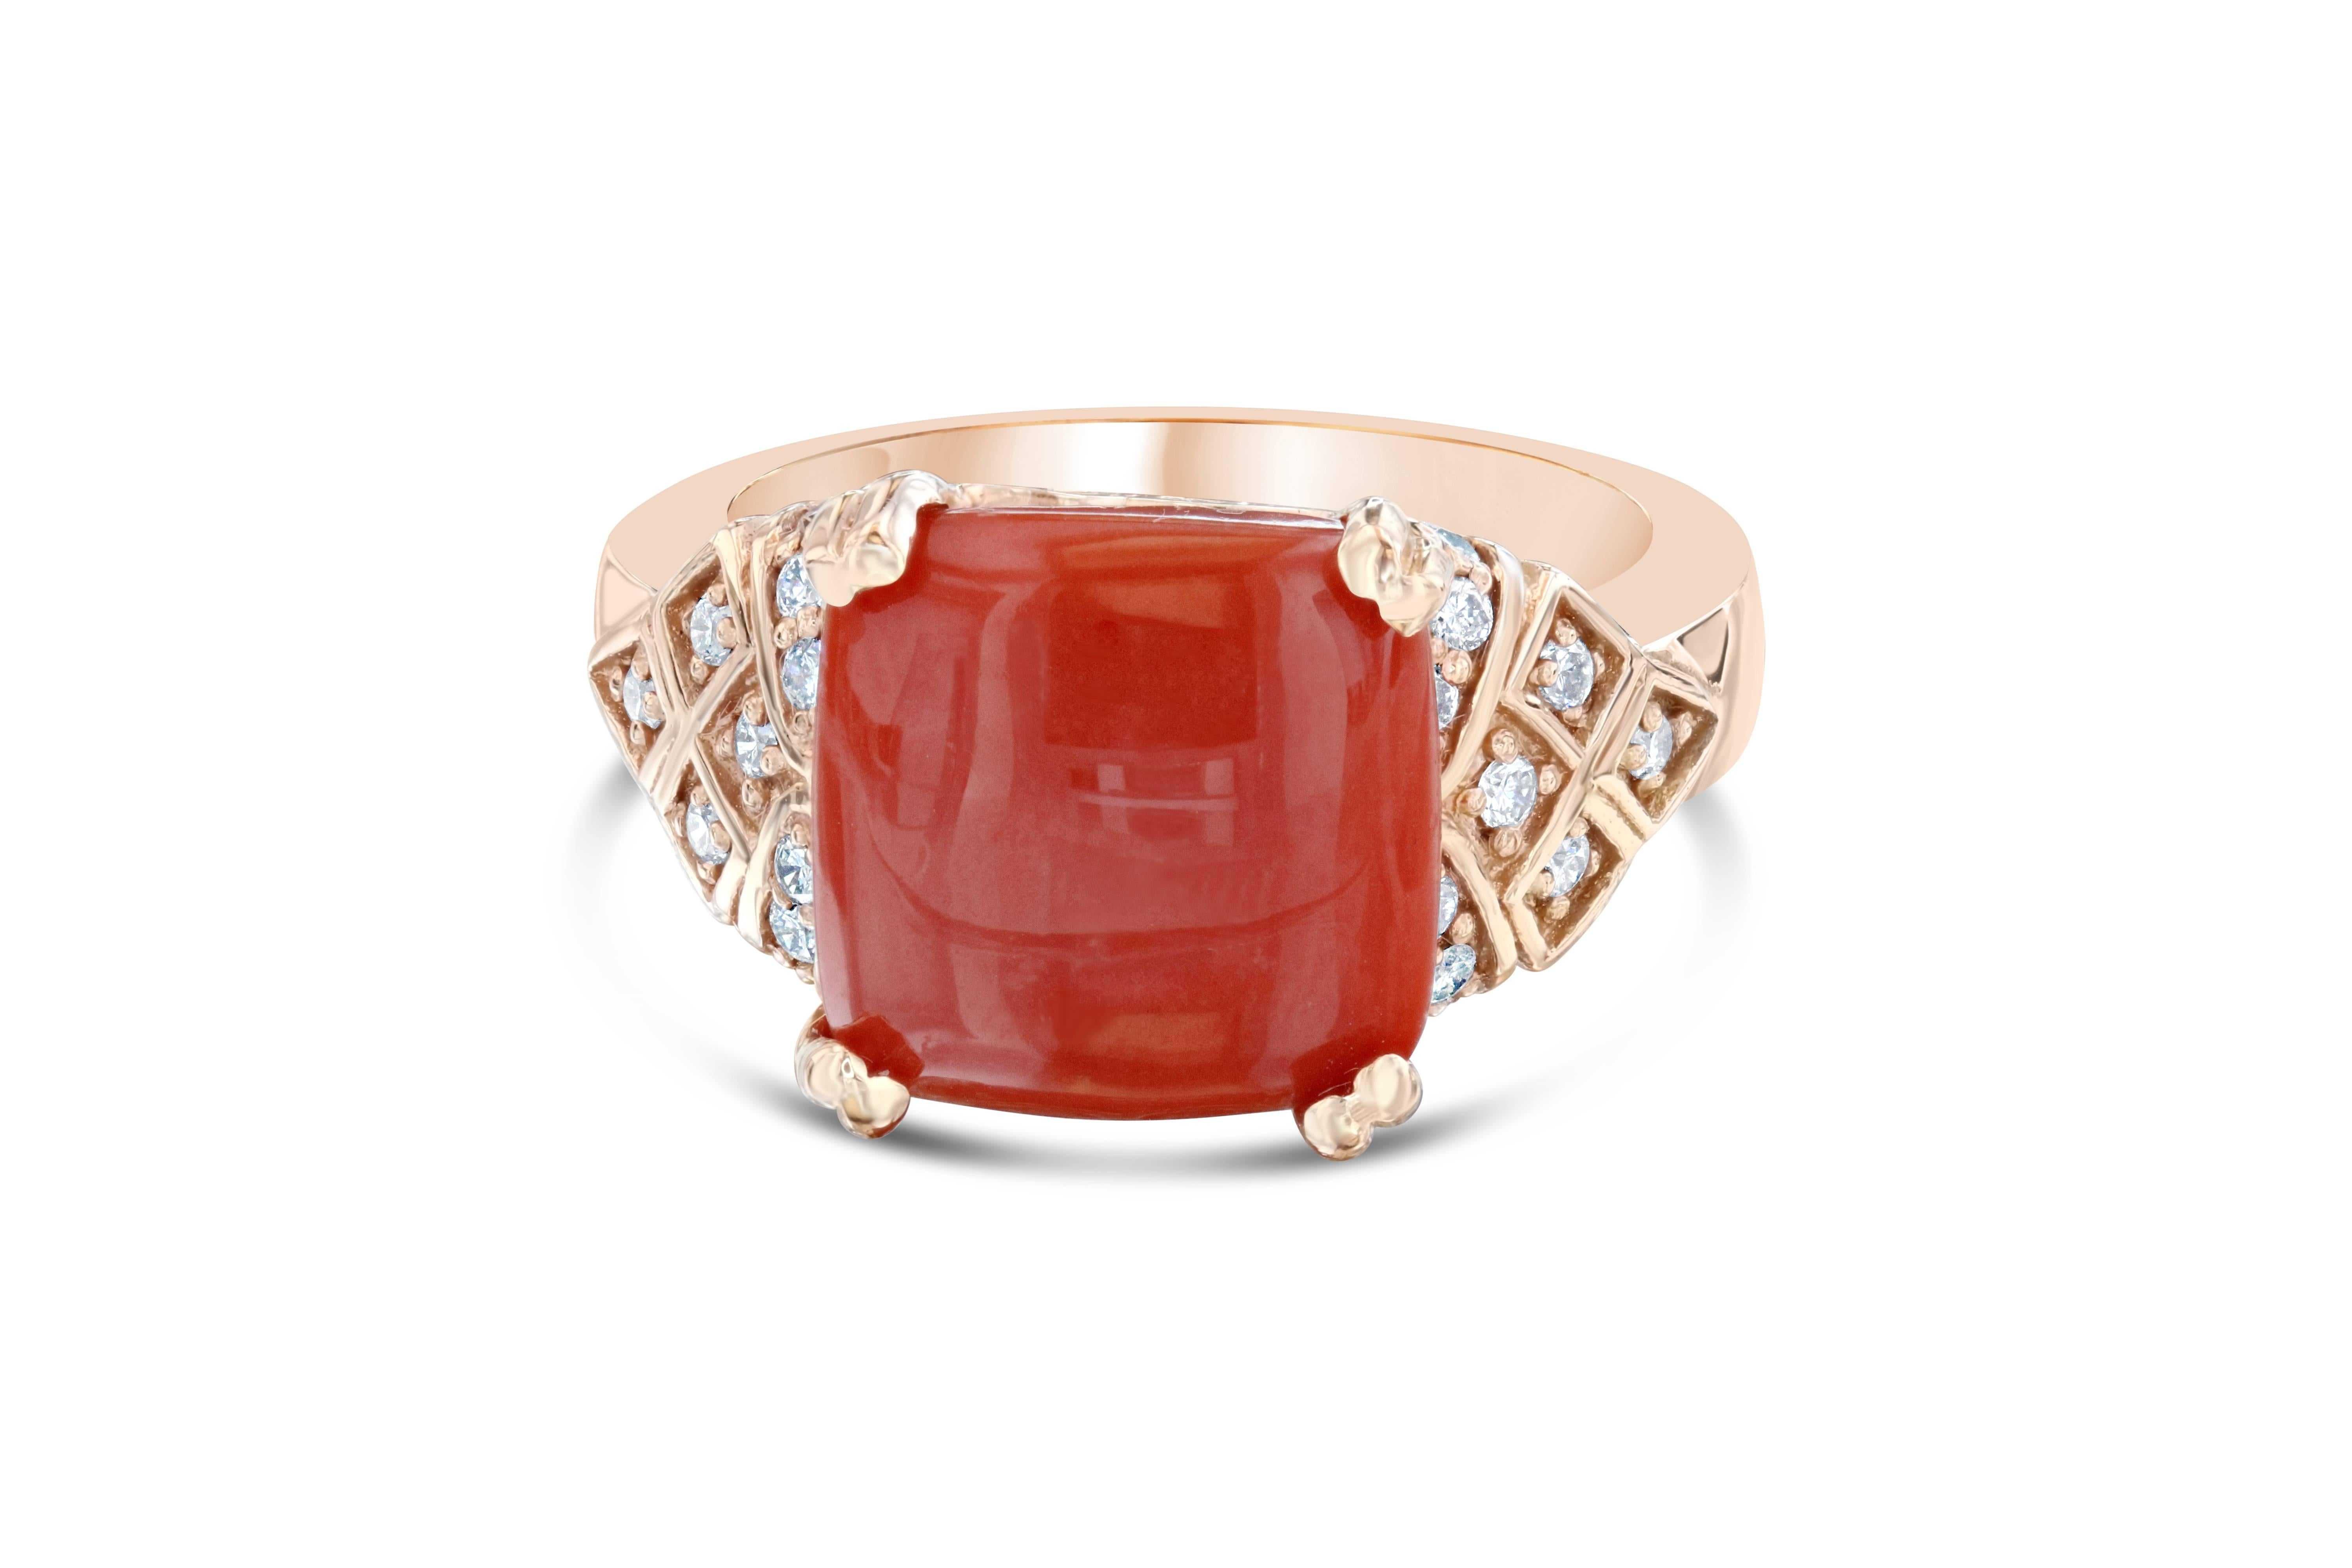 The Coral is 4.39 Carats and is surrounded by 36 Round Cut Diamonds weighing 0.61 Carats.  The Total Carat Weight of the ring is 5.00 Carats. 

It is crafted in 14K Rose Gold and weighs 7.8 grams. 

The ring is a size 7 and can be resized, if